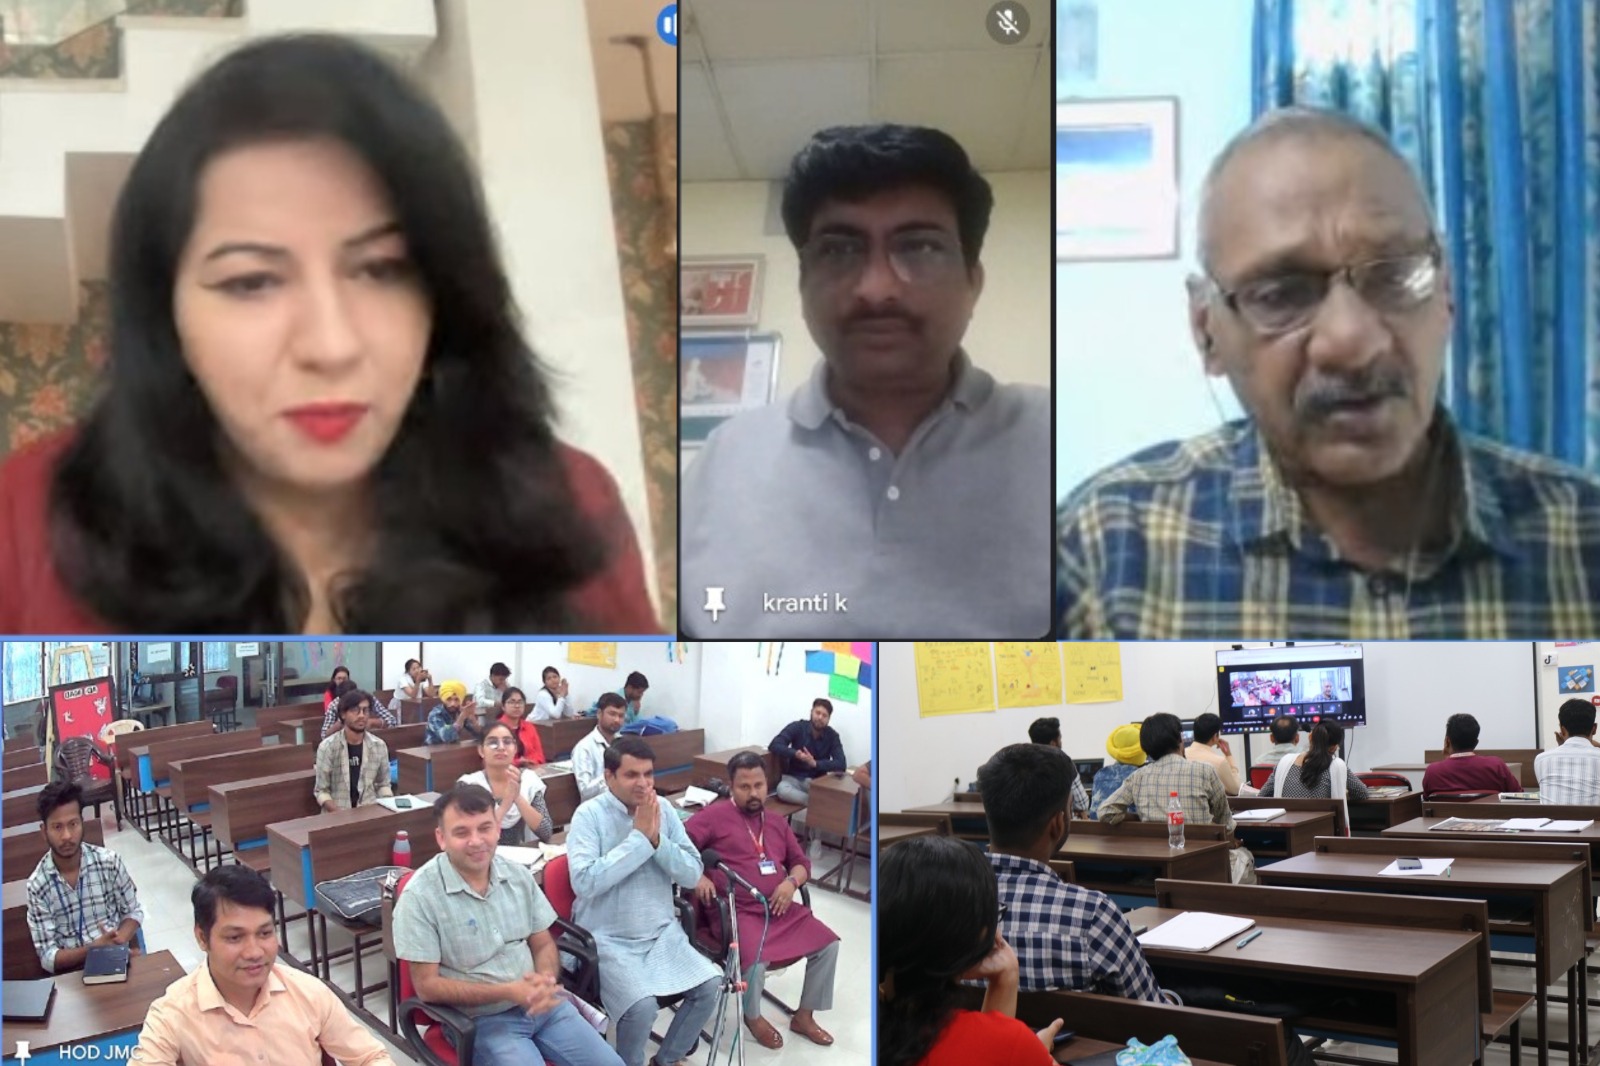 Haryana Central University organized a workshop on the occasion of World Press Freedom Day